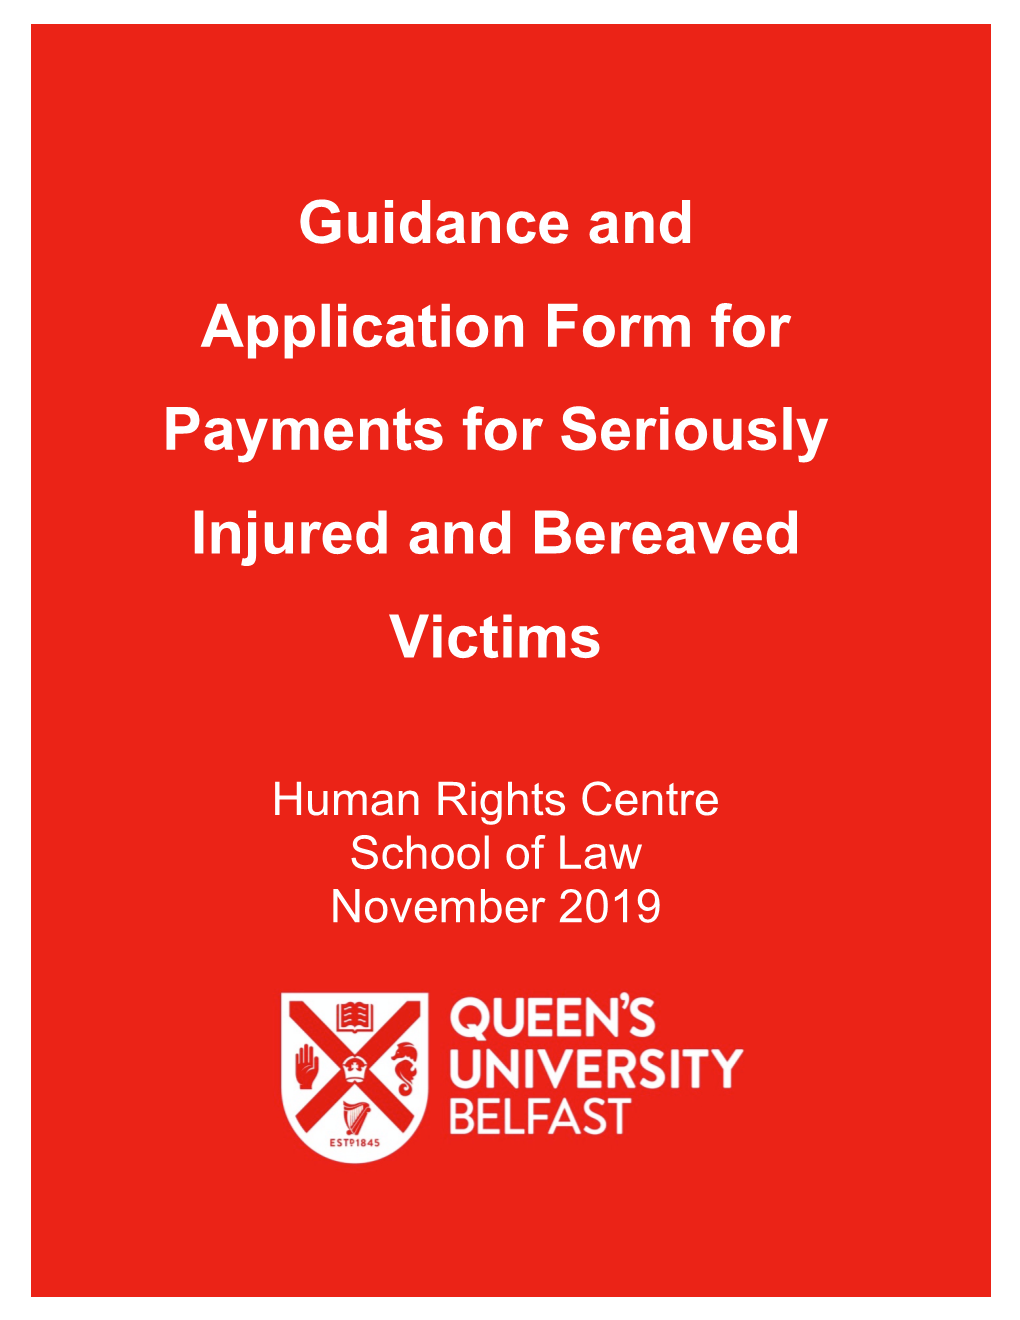 Guidance and Application Form for Payments for Seriously Injured and Bereaved